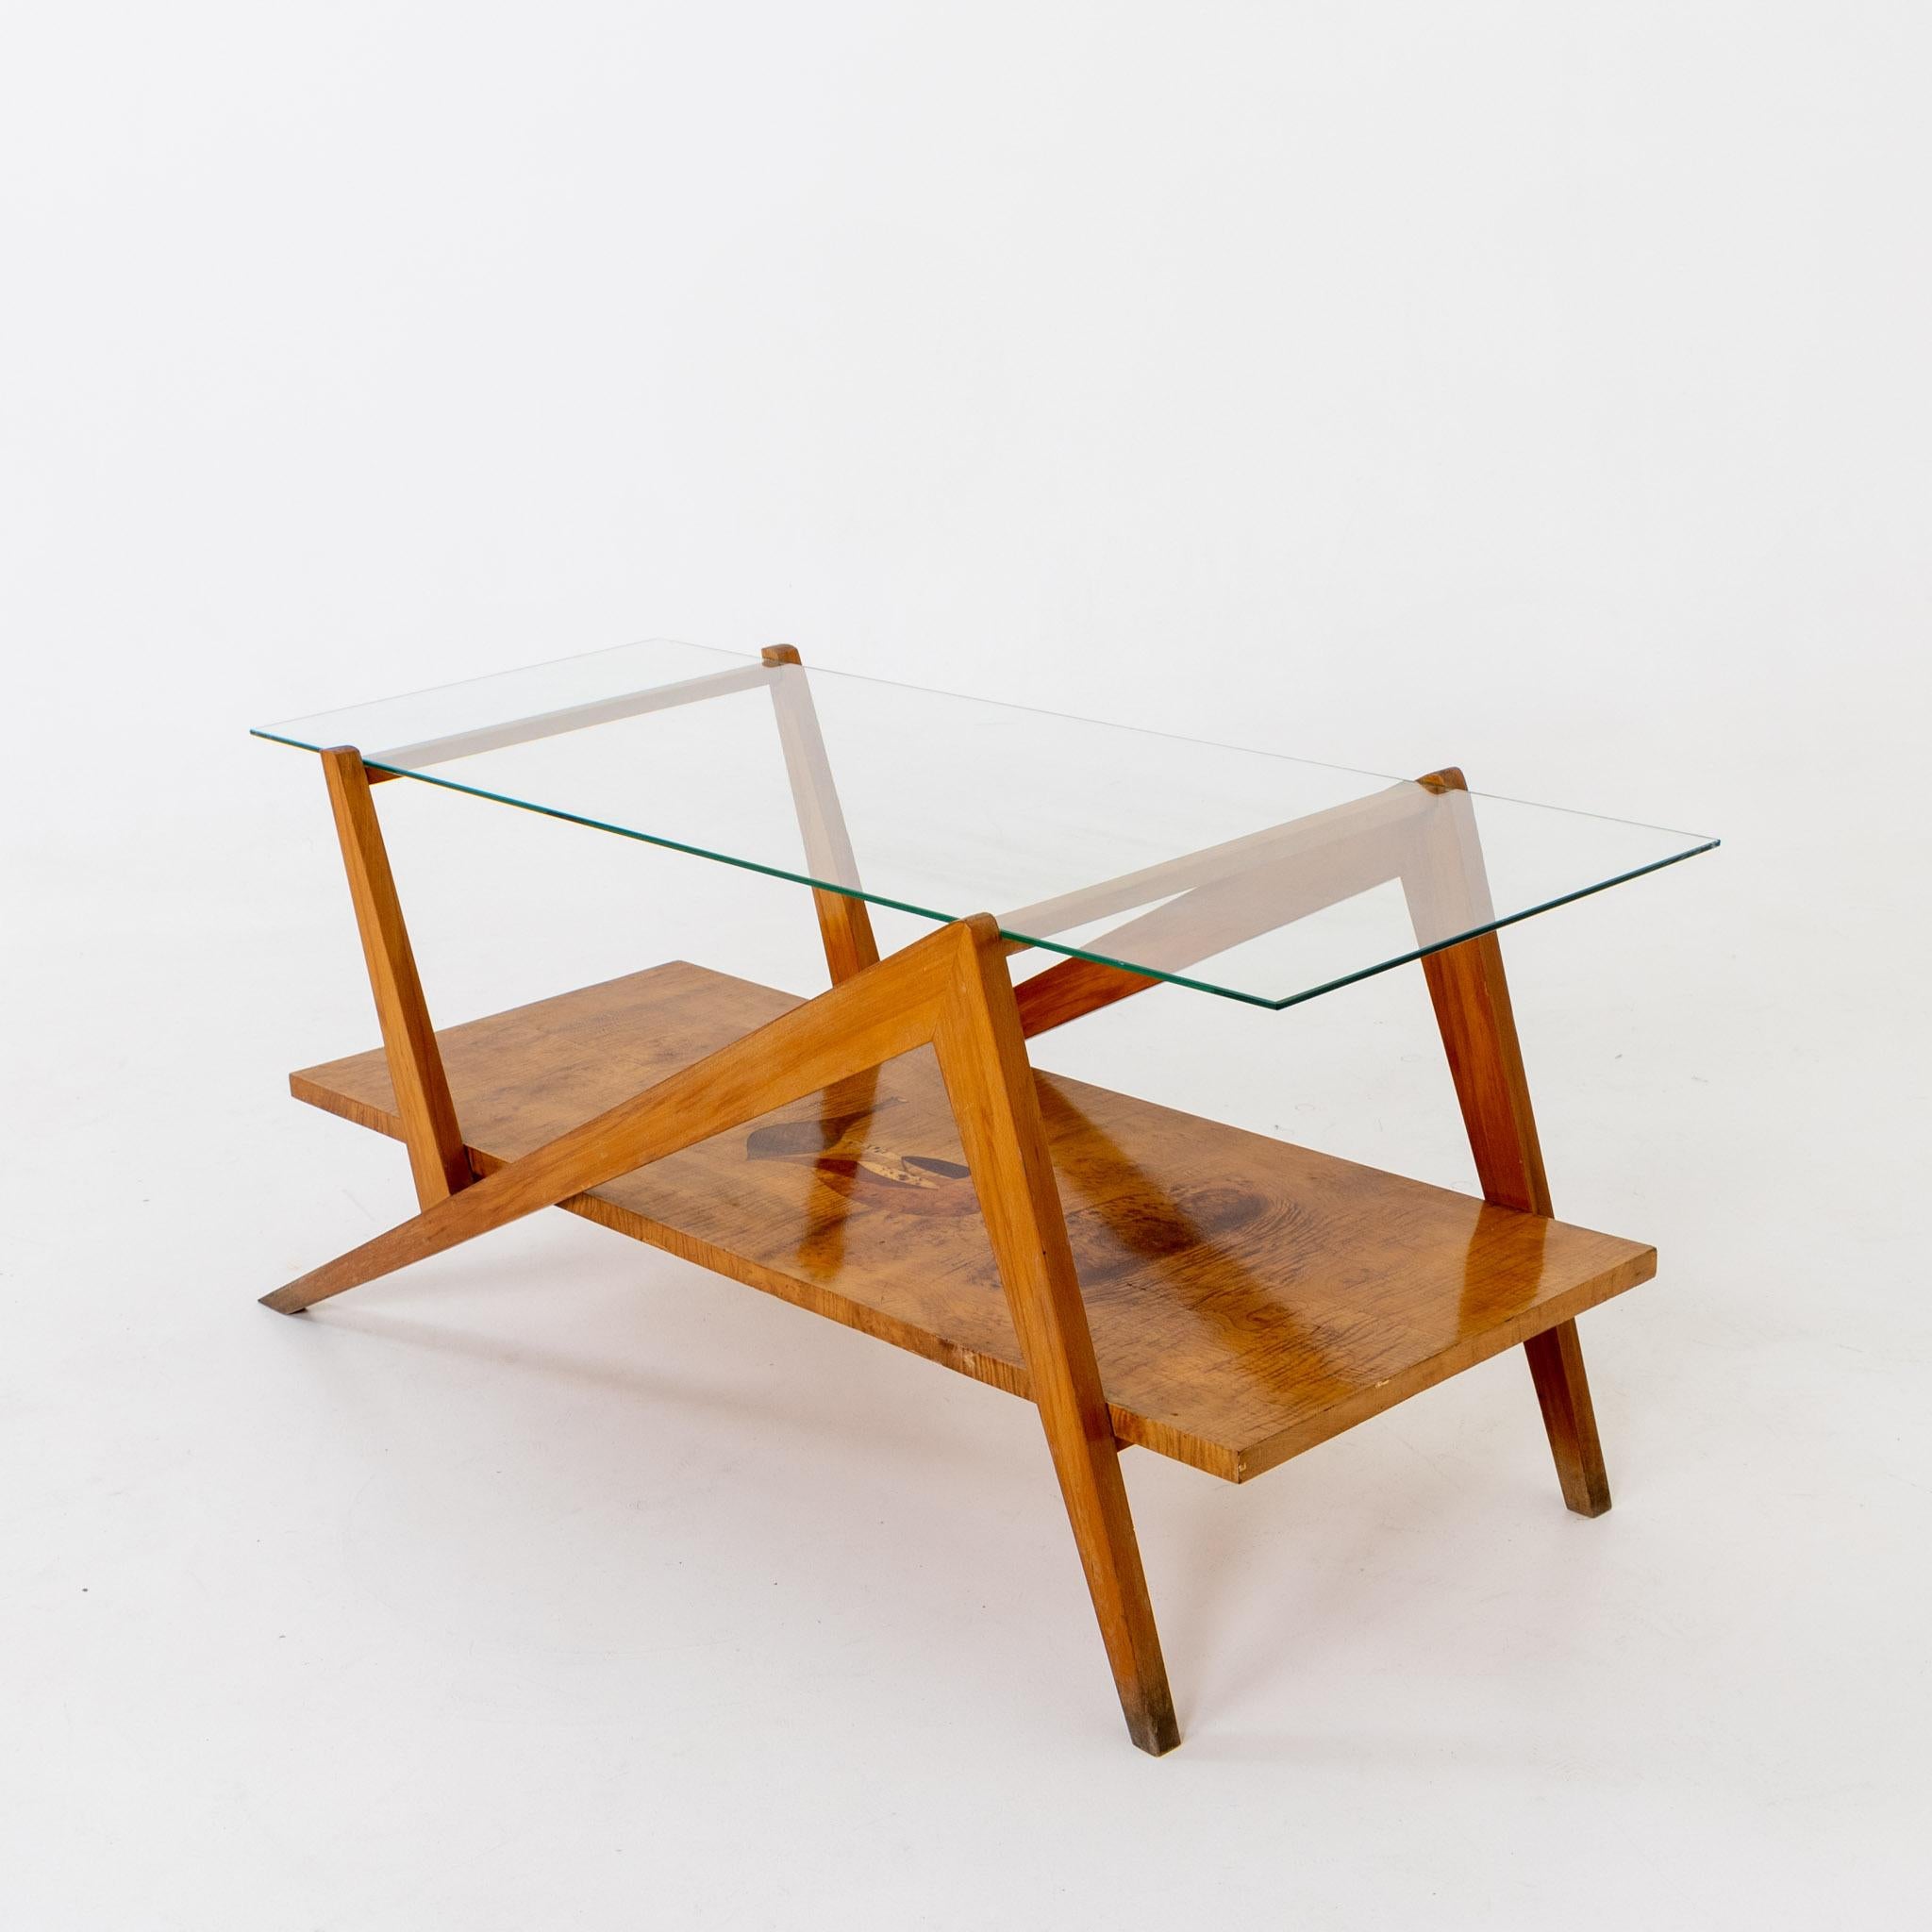 Coffee table with glass top on unusual frame with a shelf and vase-shaped inlays of various woods.